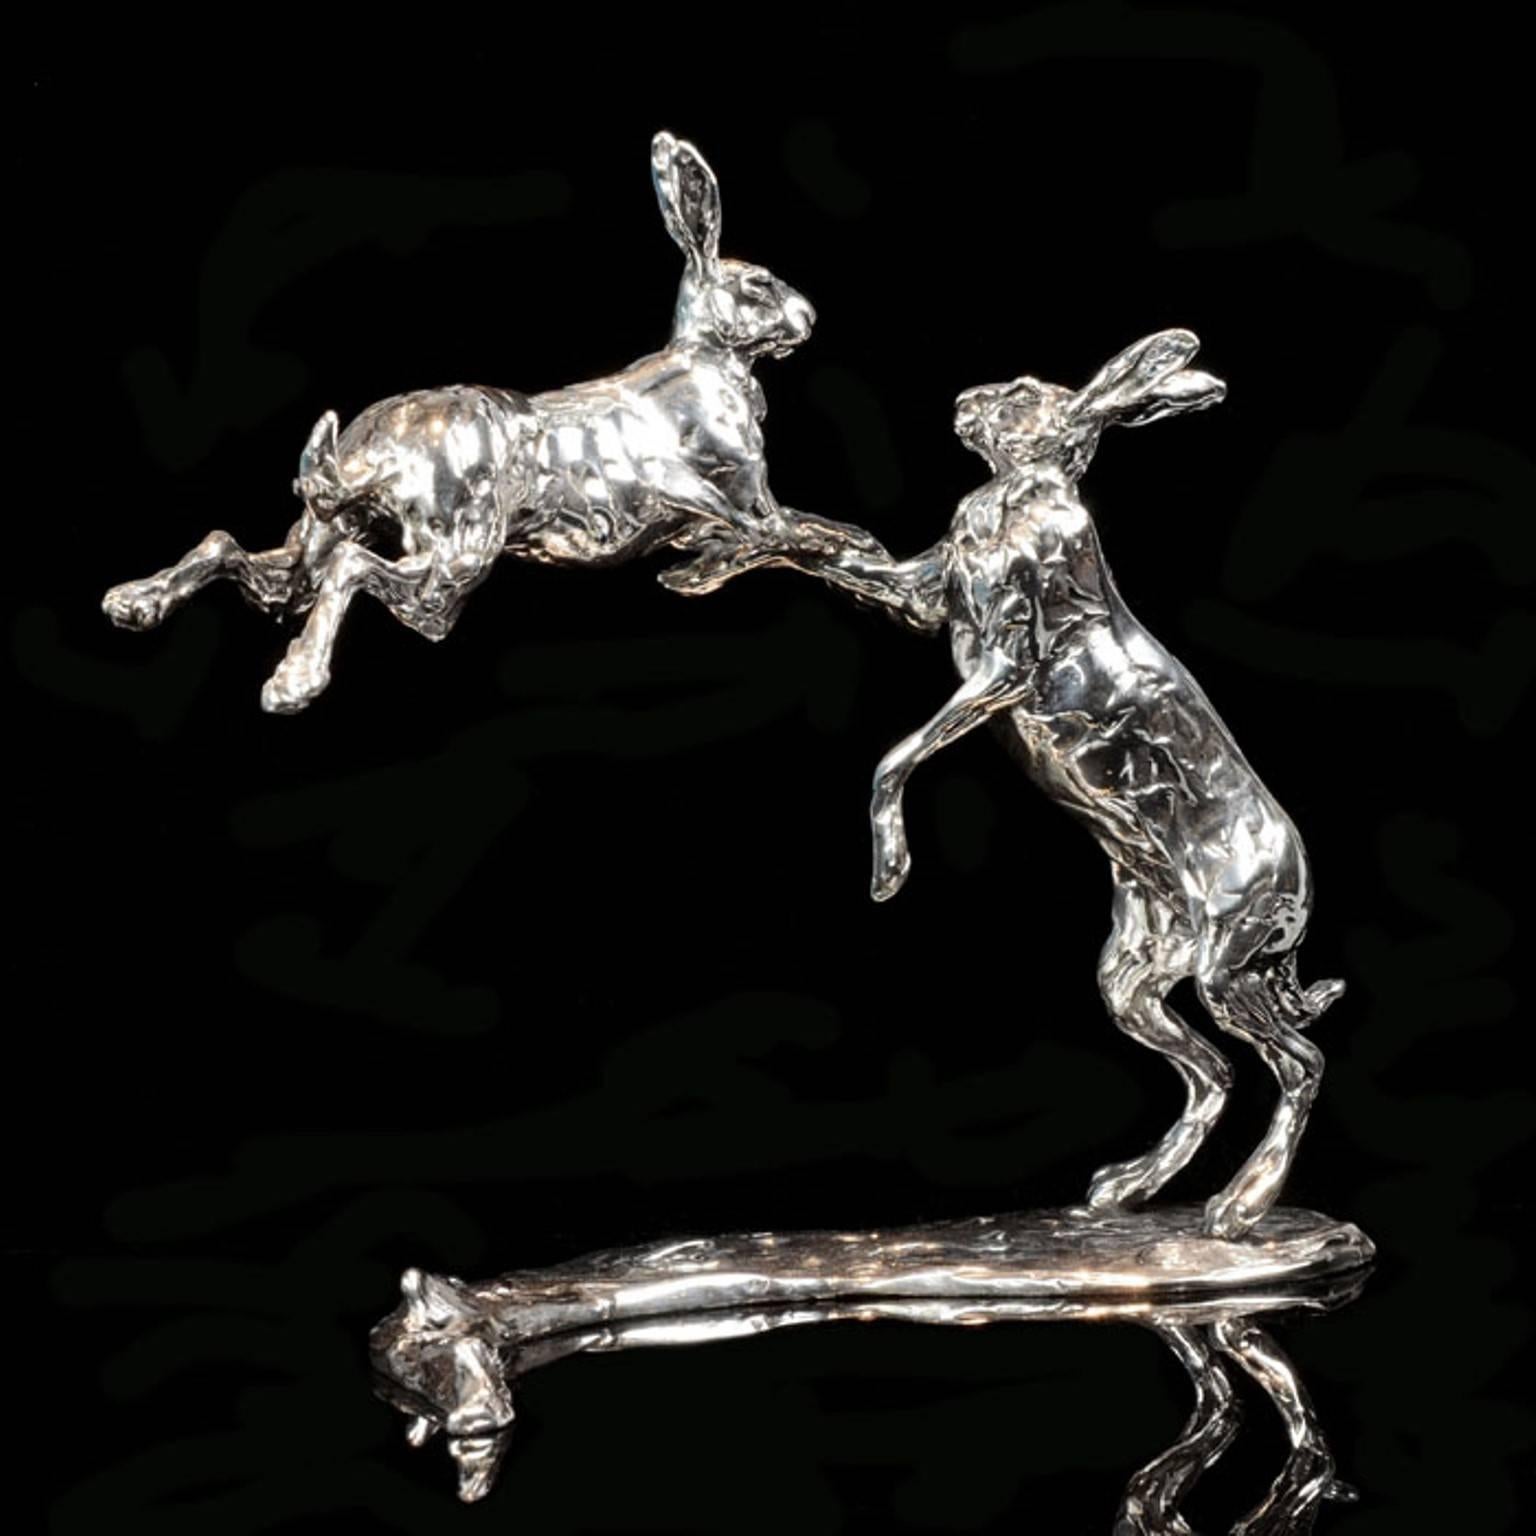 leaping hare sculpture